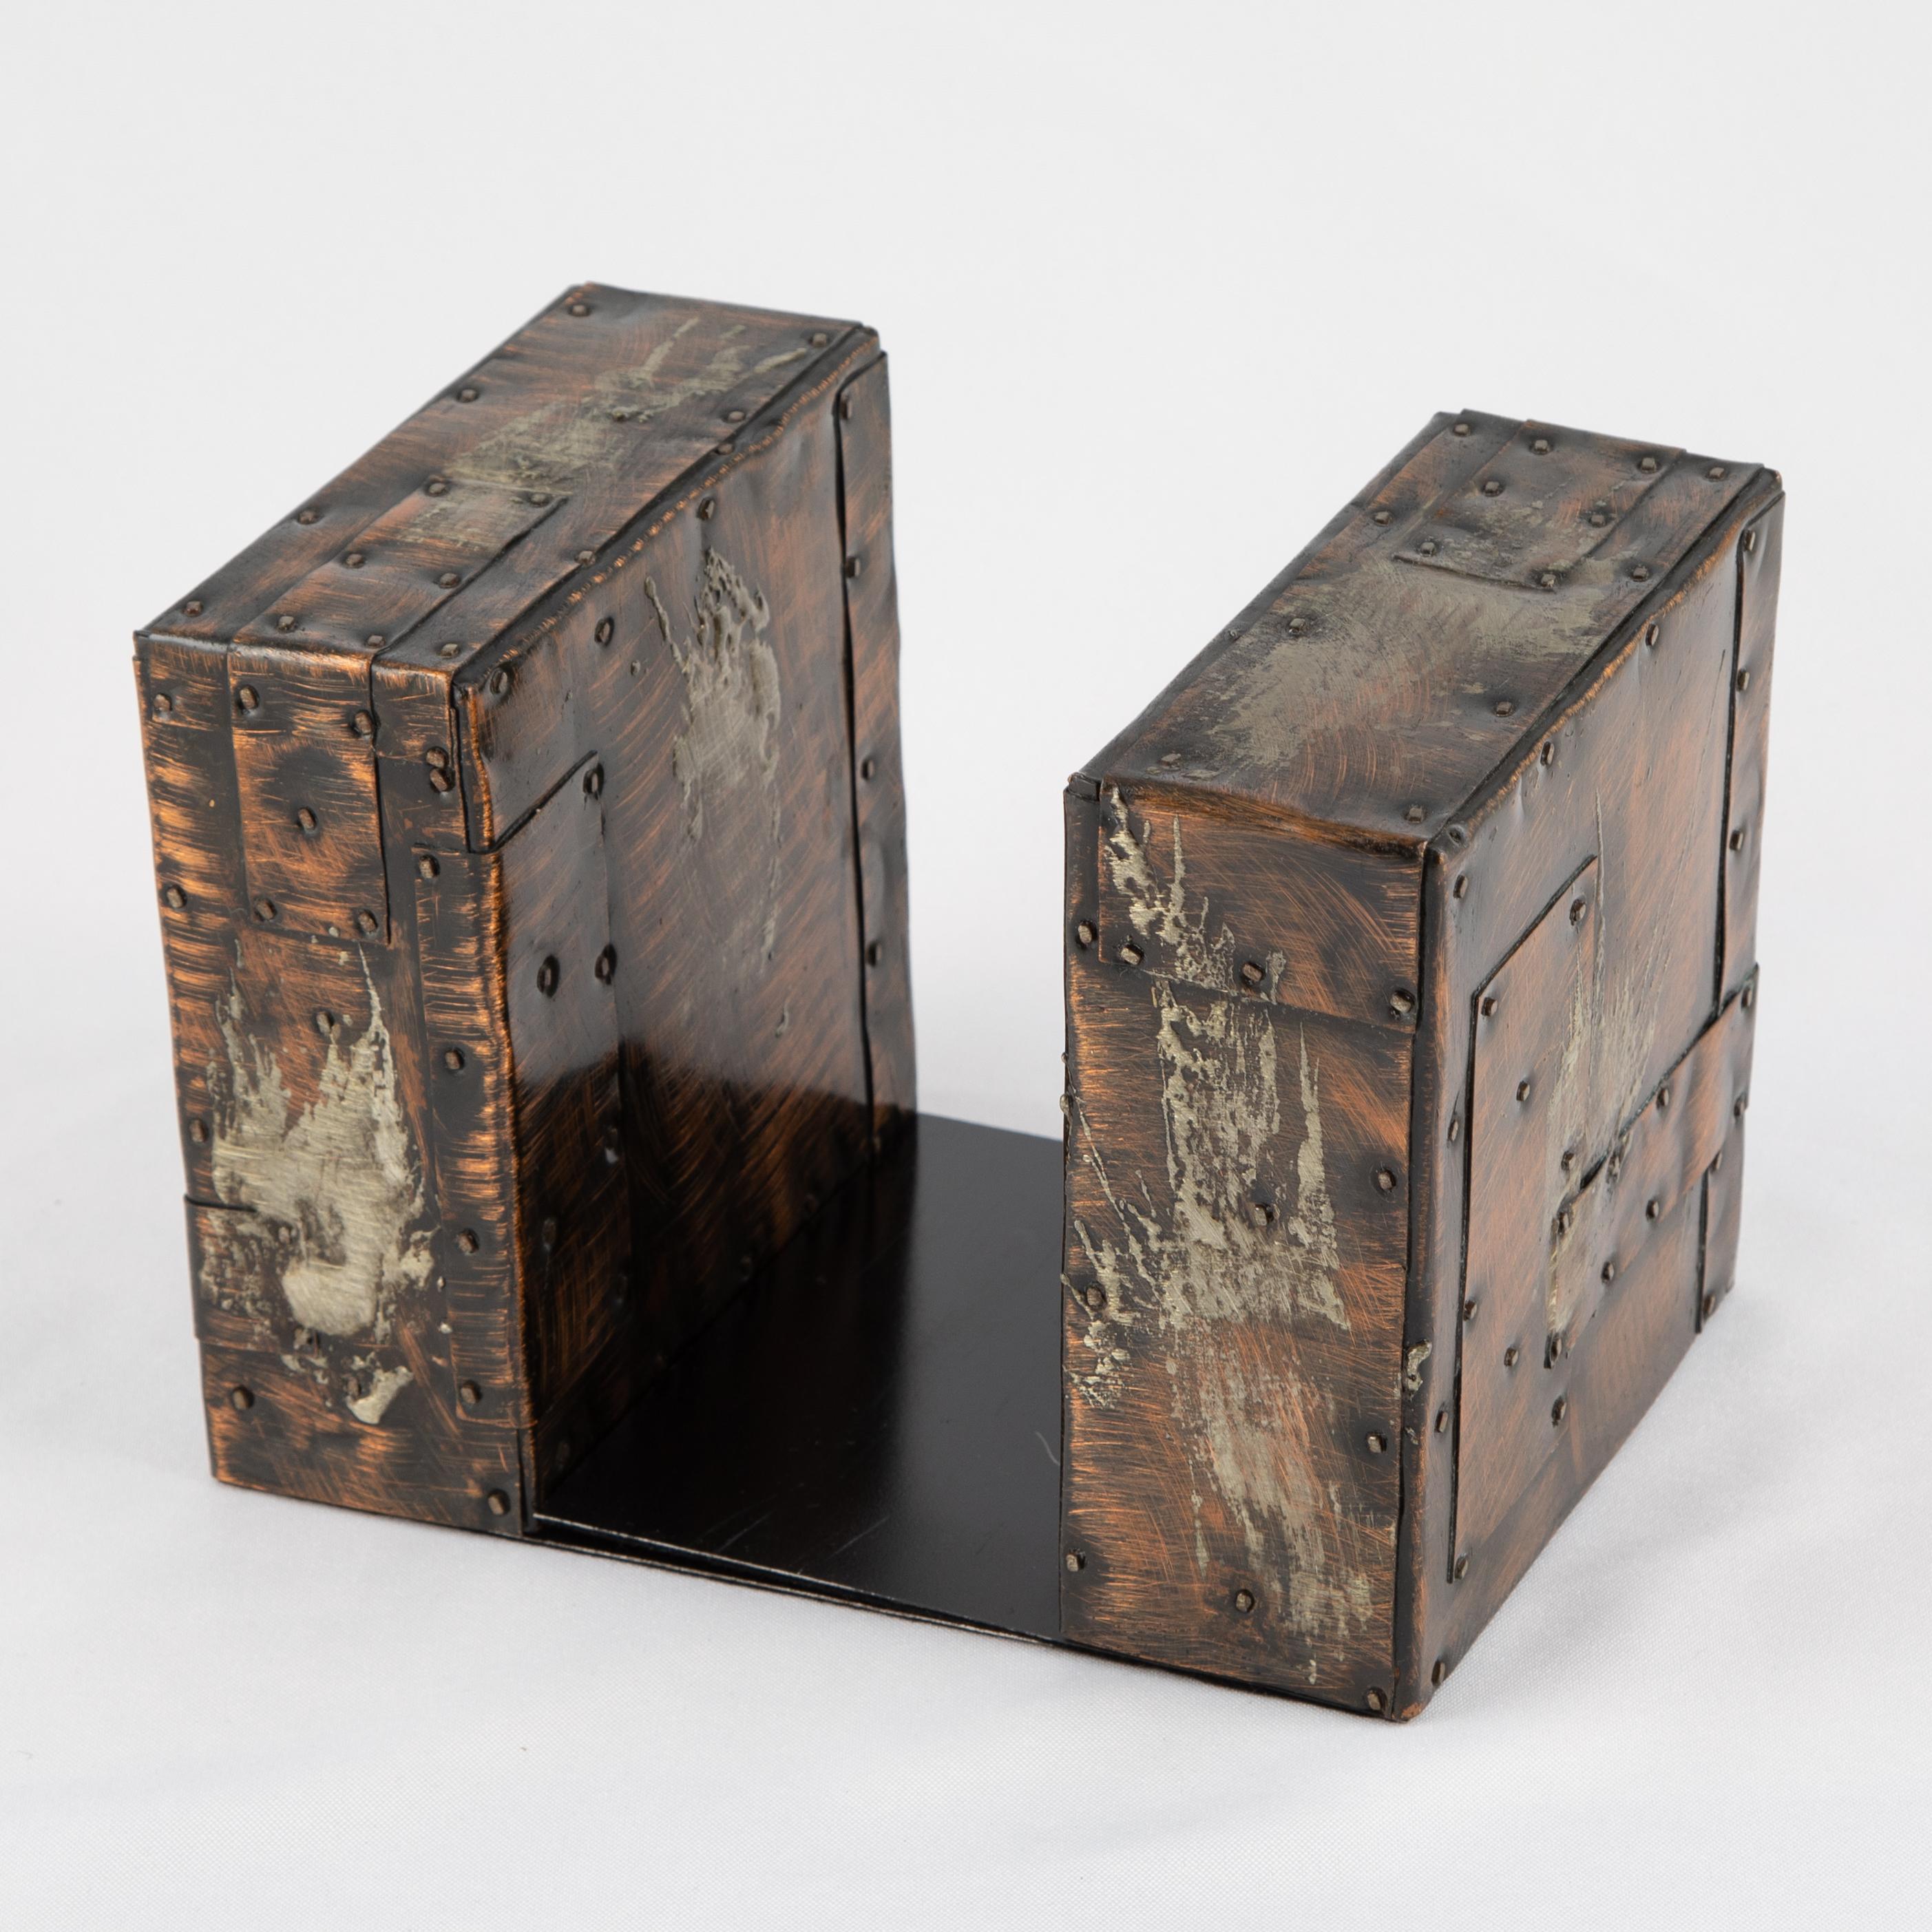 North American Paul Evans Brutalist Copper Patchwork Bookends, circa 1970s For Sale